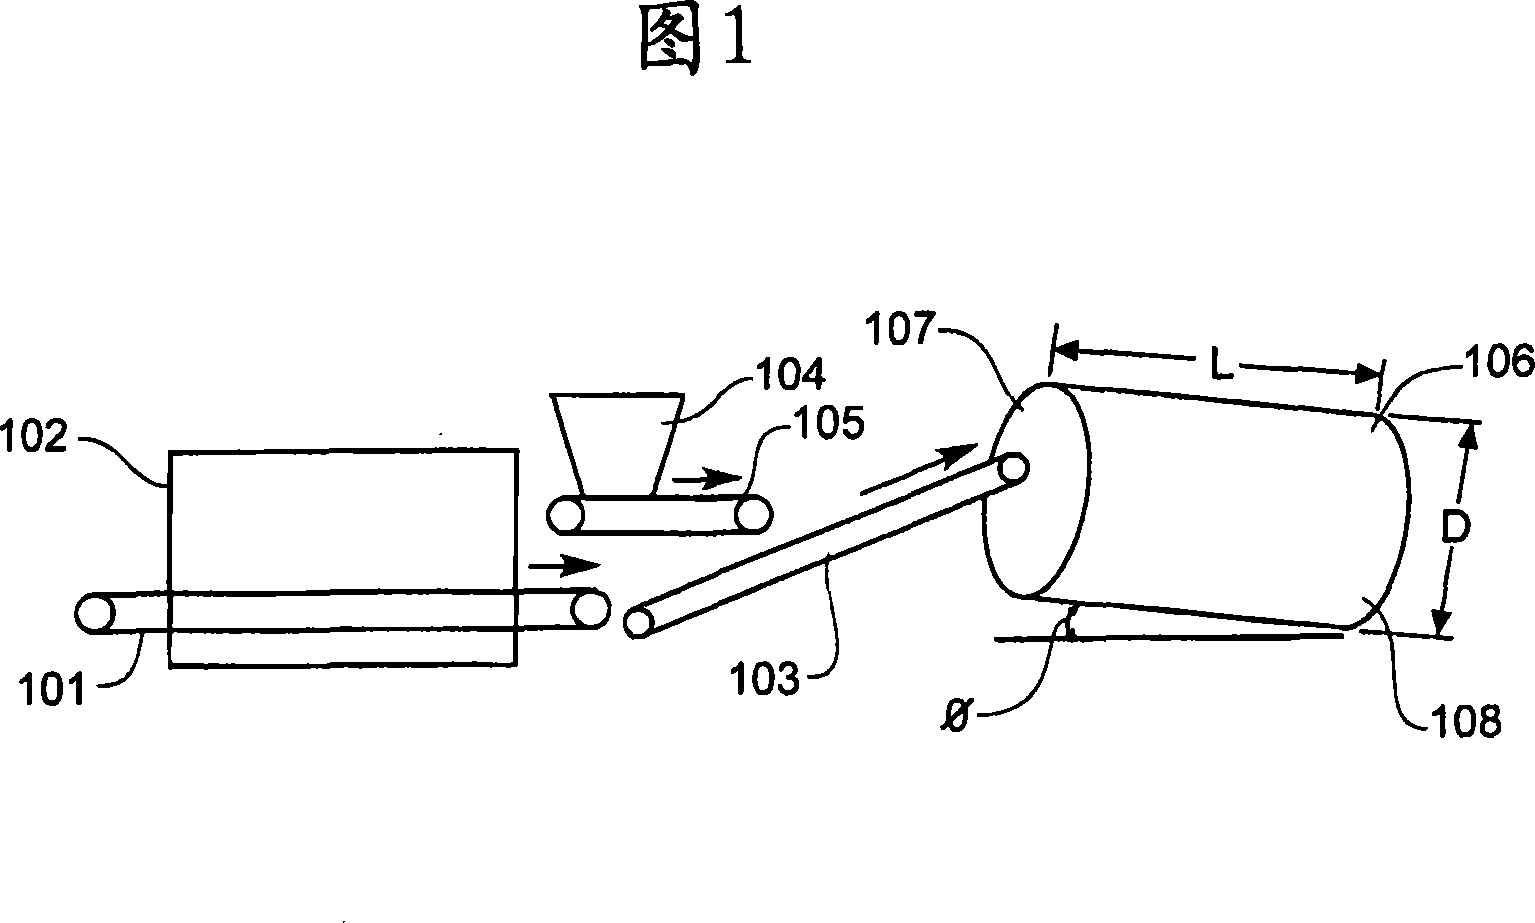 Improved tumbledrum design and method for coating objects